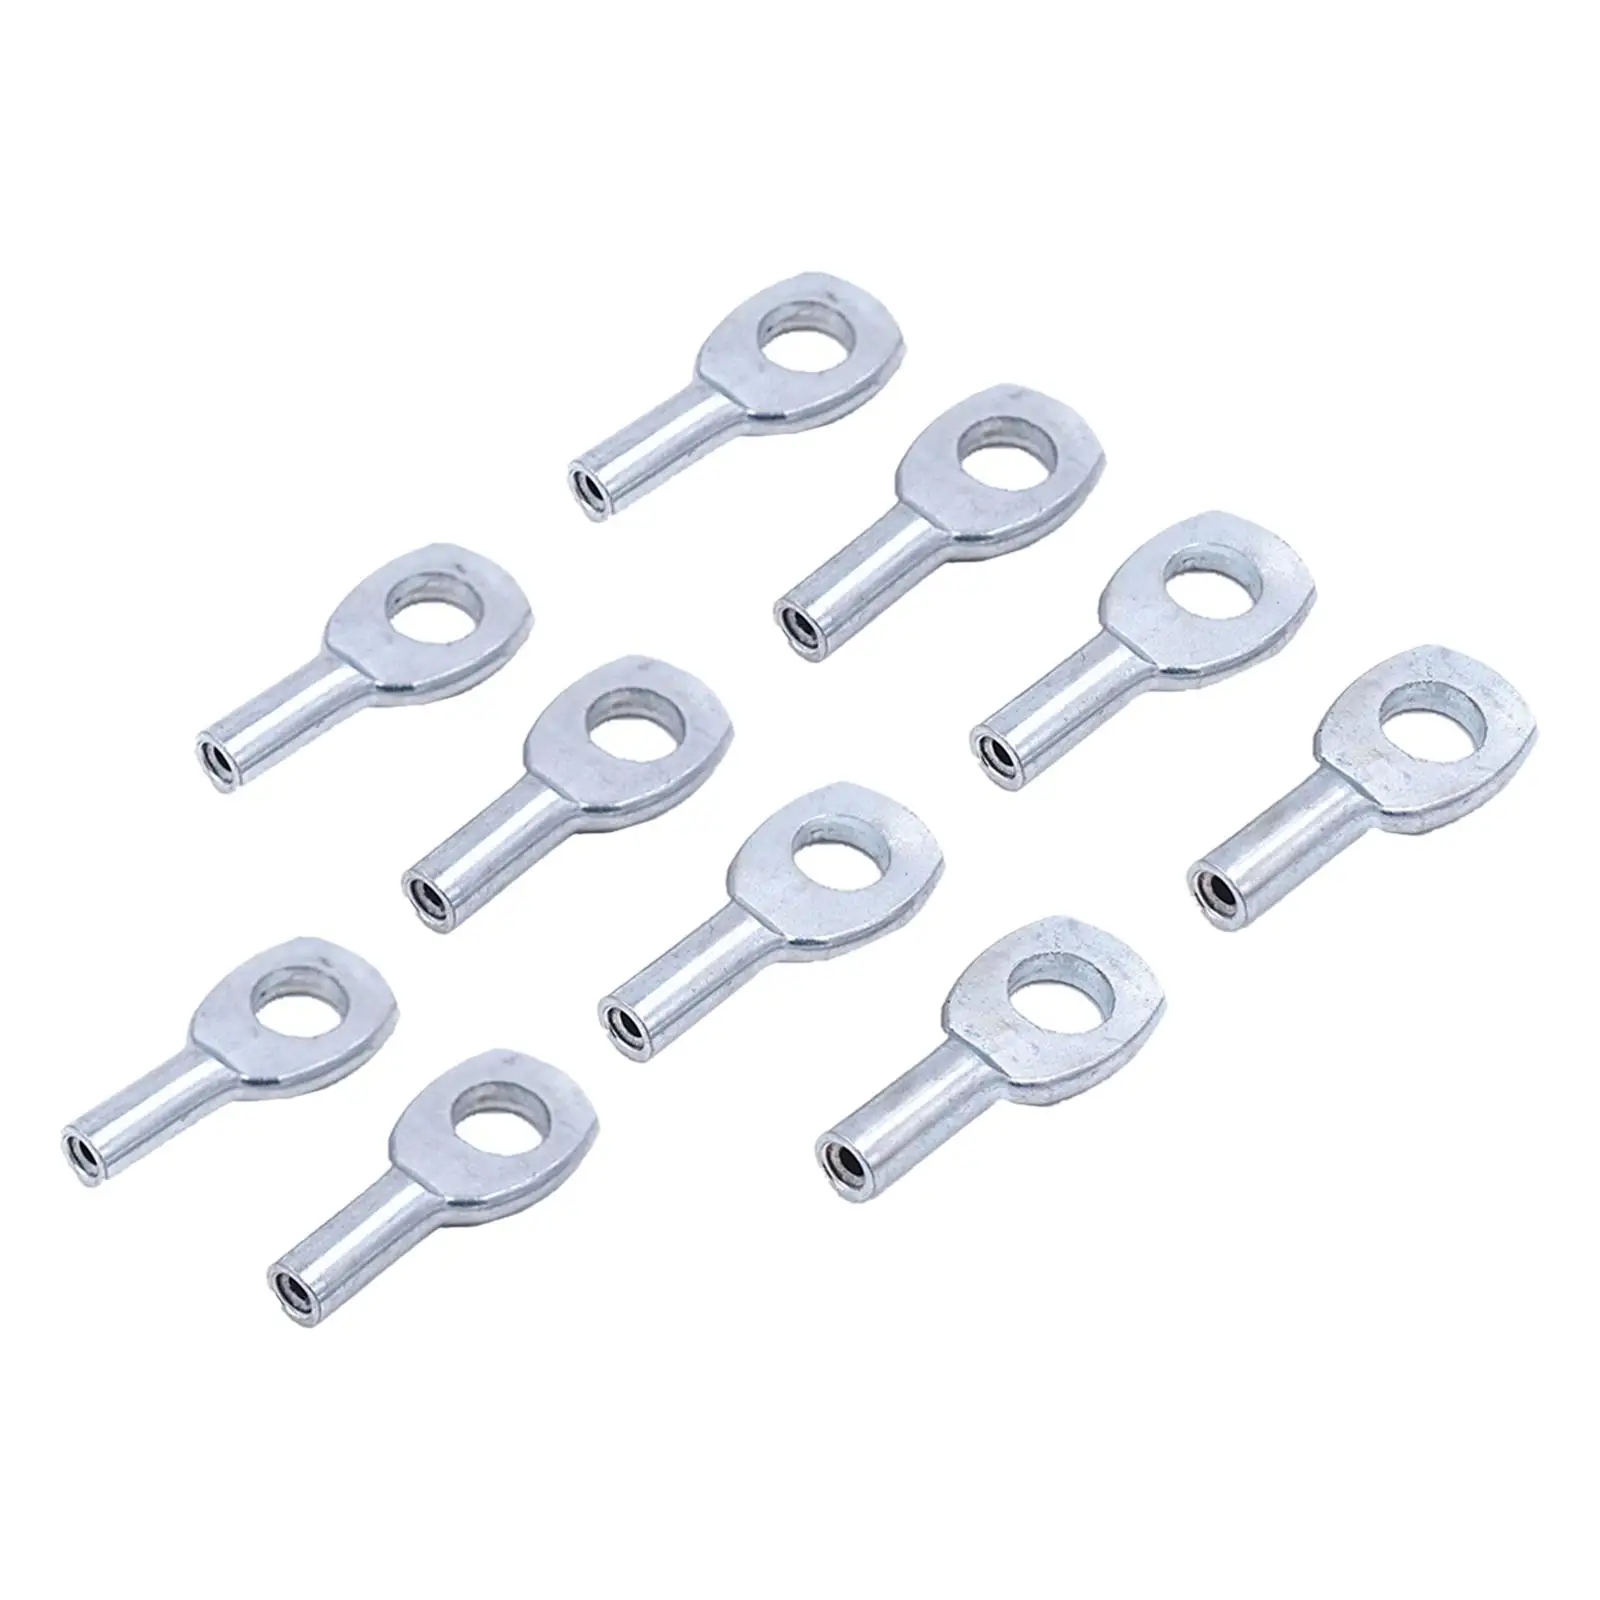 10 Pieces Steel Wire Rope Eyelets Gym Machine Cable Replacement Exercise Machine